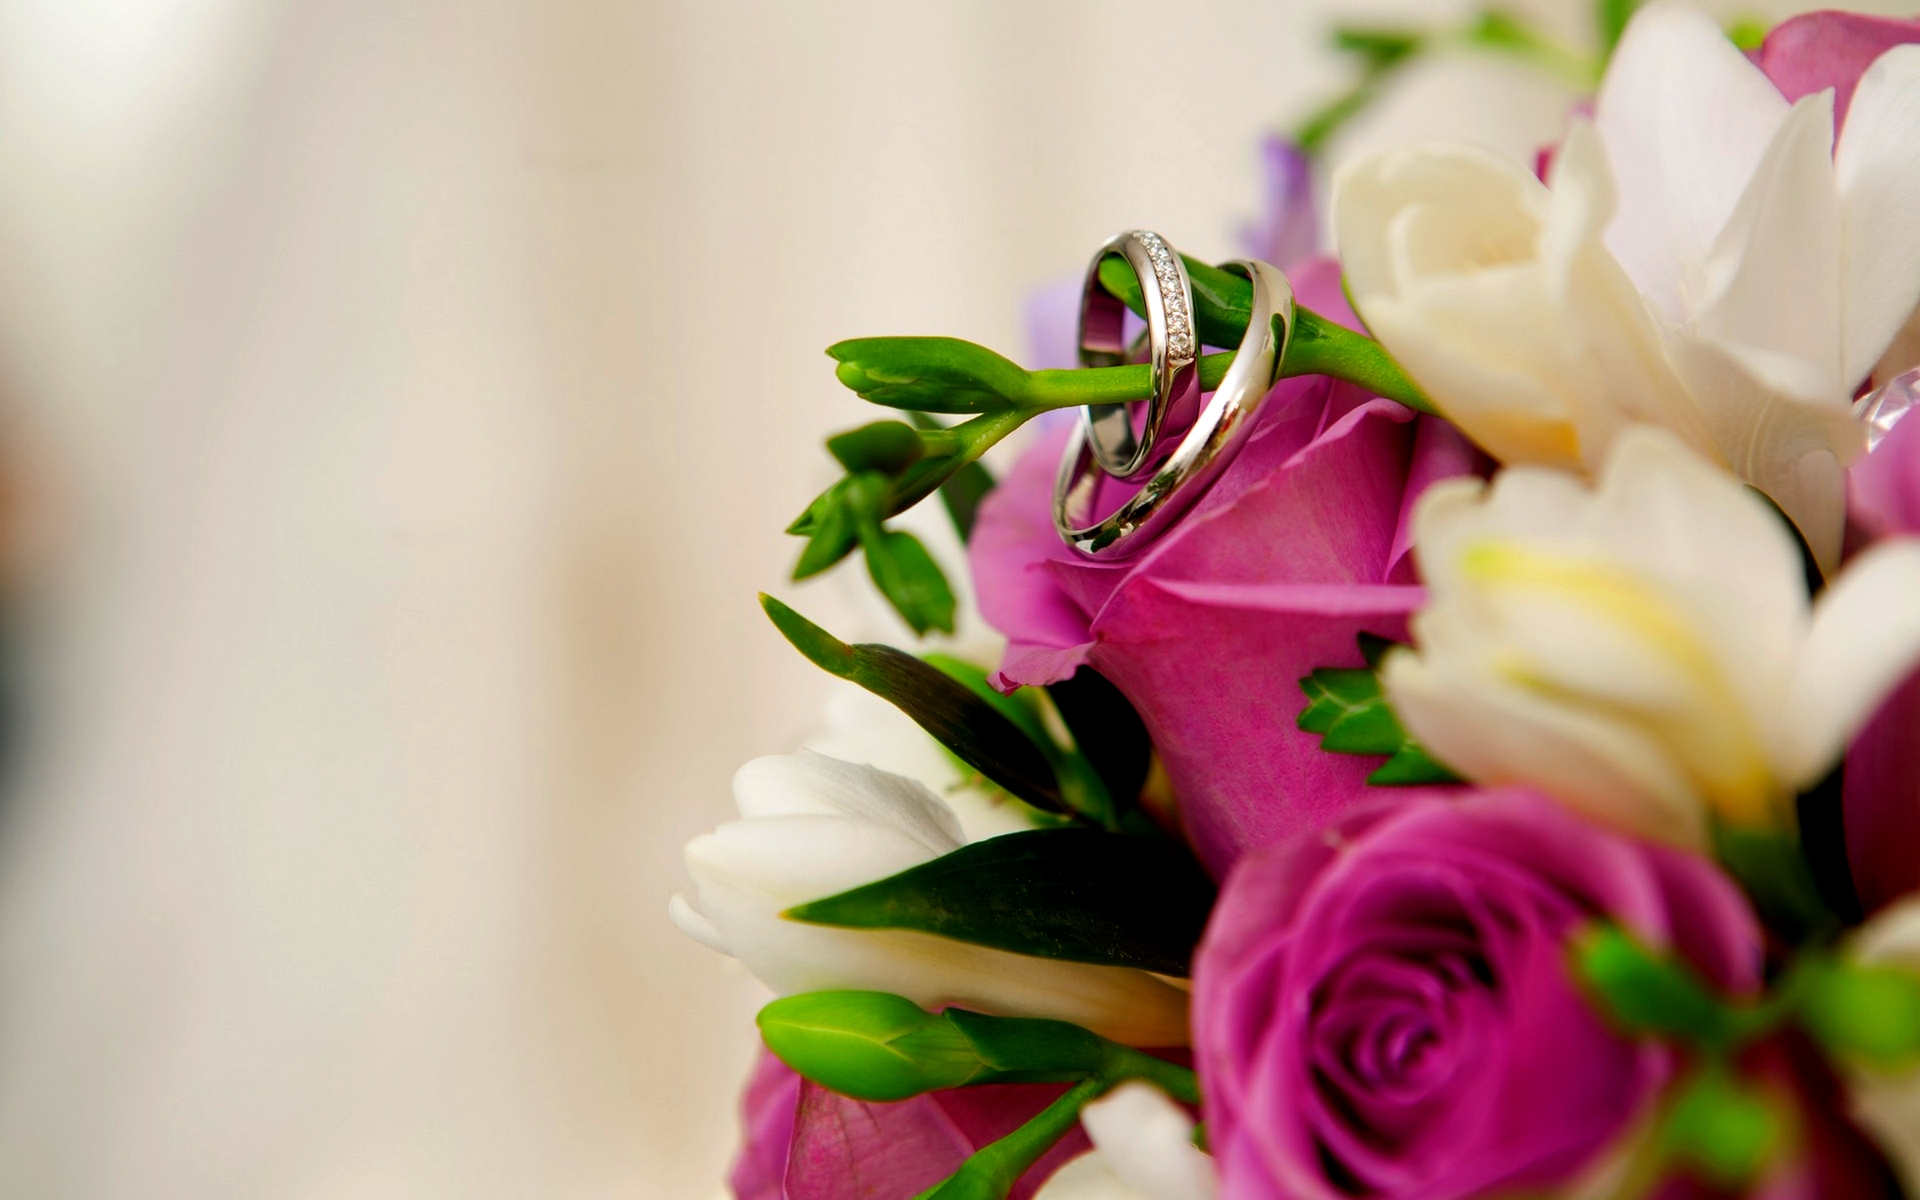 Wedding Rings On Flowers Bouquet High Quality Wallpaper